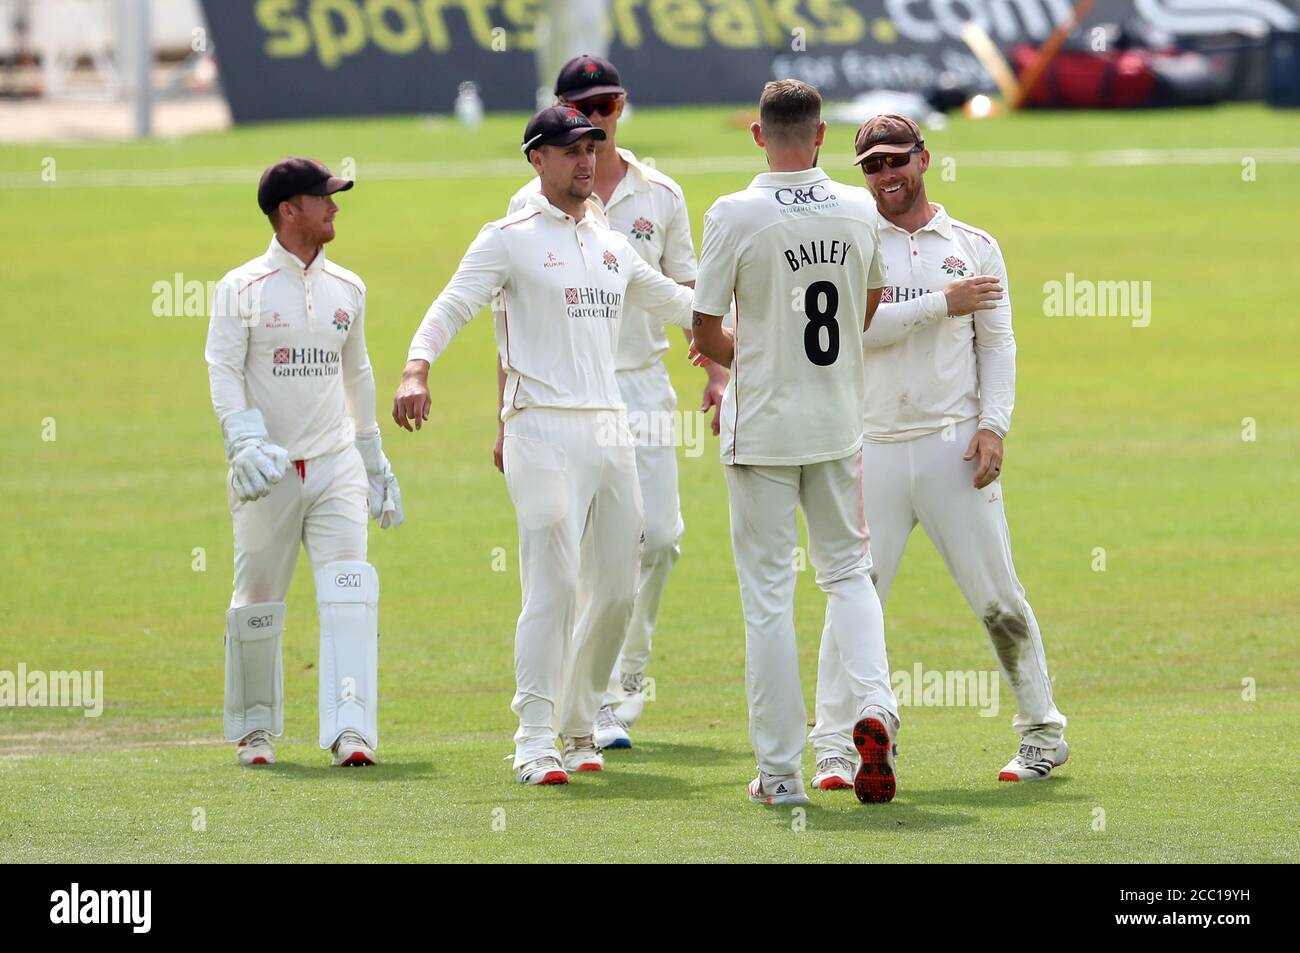 Lancashire's Steven Croft (right) celebrates with bowler Tom Bailey after taking the wicket of Nottinghamshire's Ben Slater during day three of the Bob Willis Trophy match at Trent Bridge, Nottingham. Stock Photo